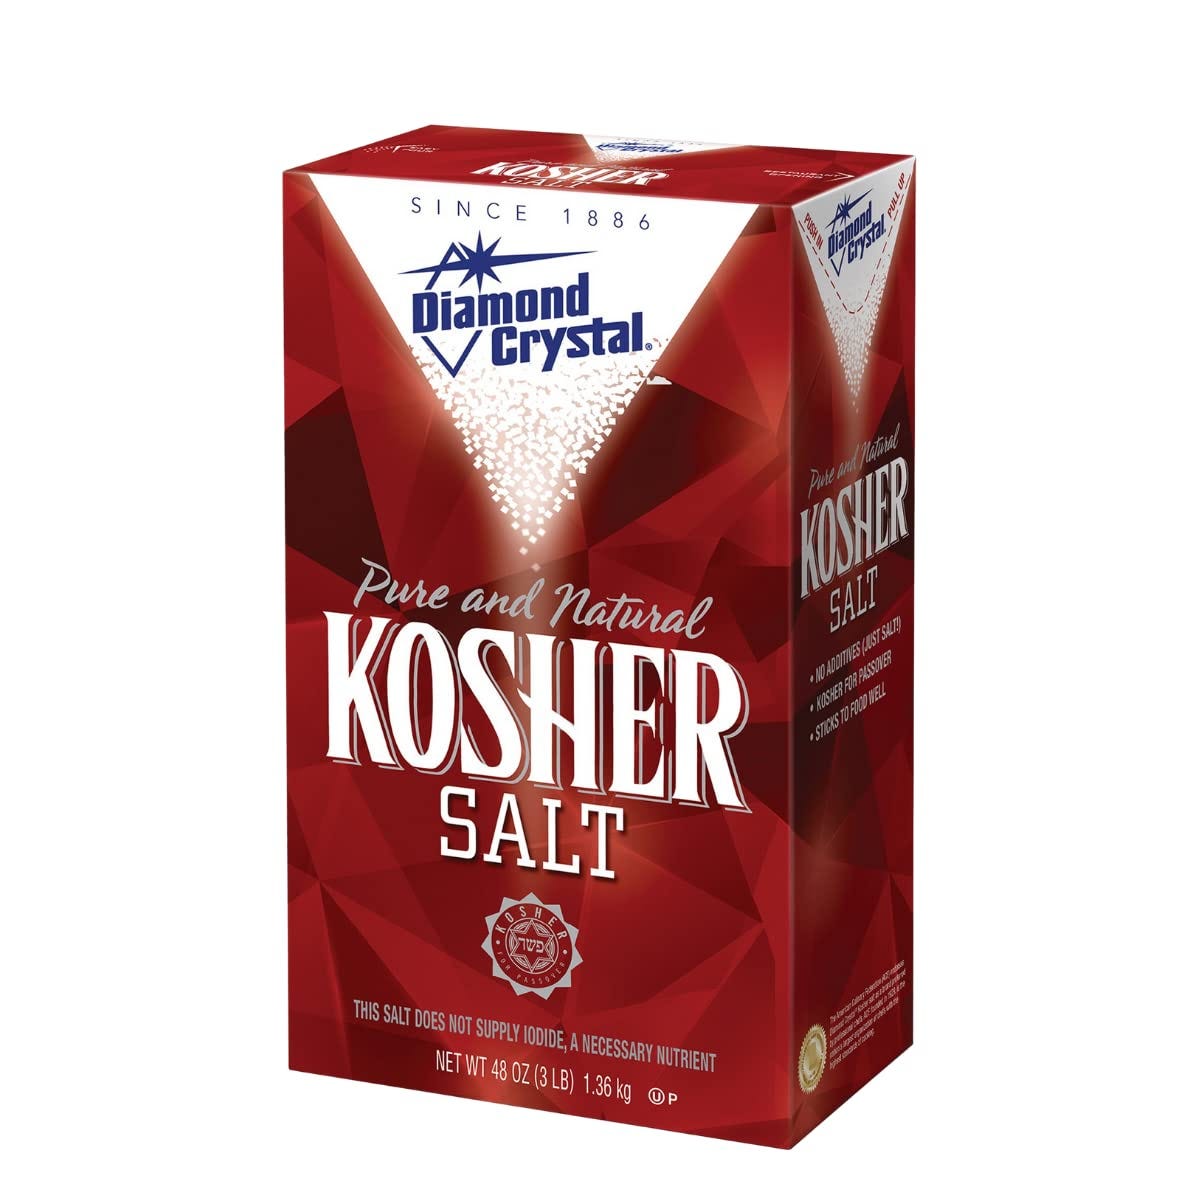 Amazon.com : Diamond Crystal Kosher Salt – Full Flavor, No Additives and  Less Sodium - Pure and Natural Since 1886 - 3 Pound Box : Grocery & Gourmet  Food